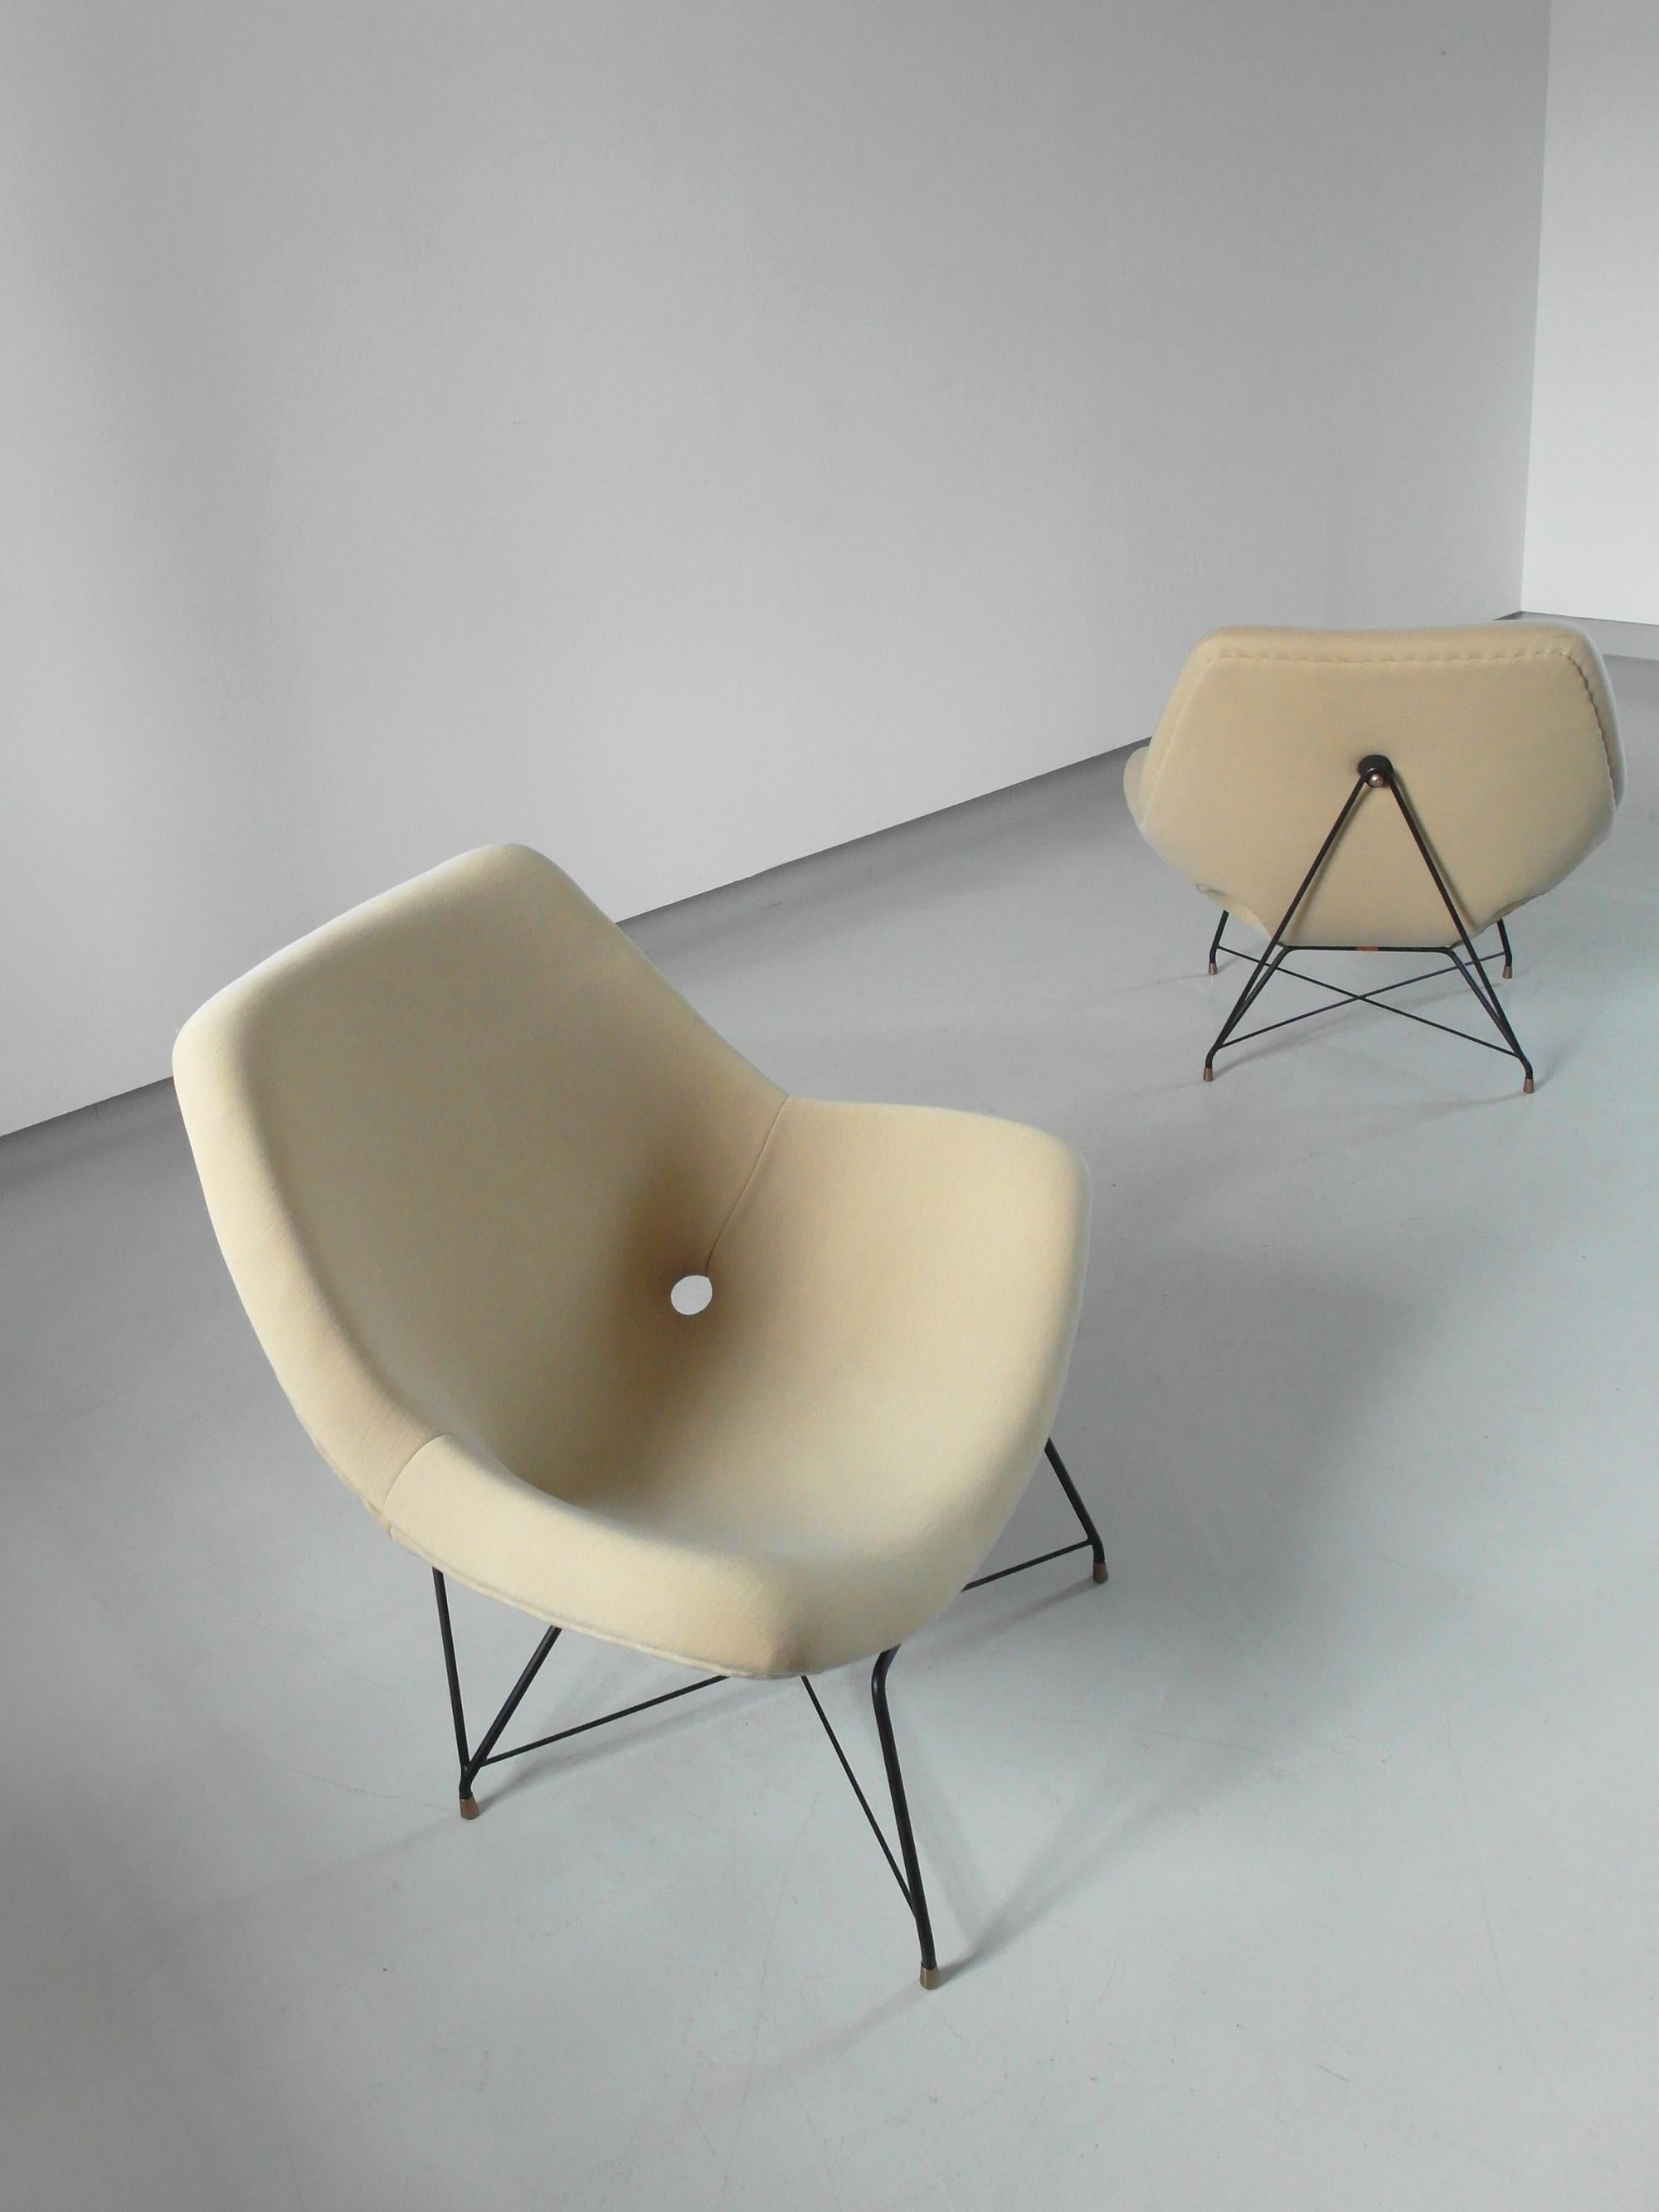 Sculptural Pair of Lounge Chairs by Augusto Bozzi for Saporiti, Italy, 1954 For Sale 5